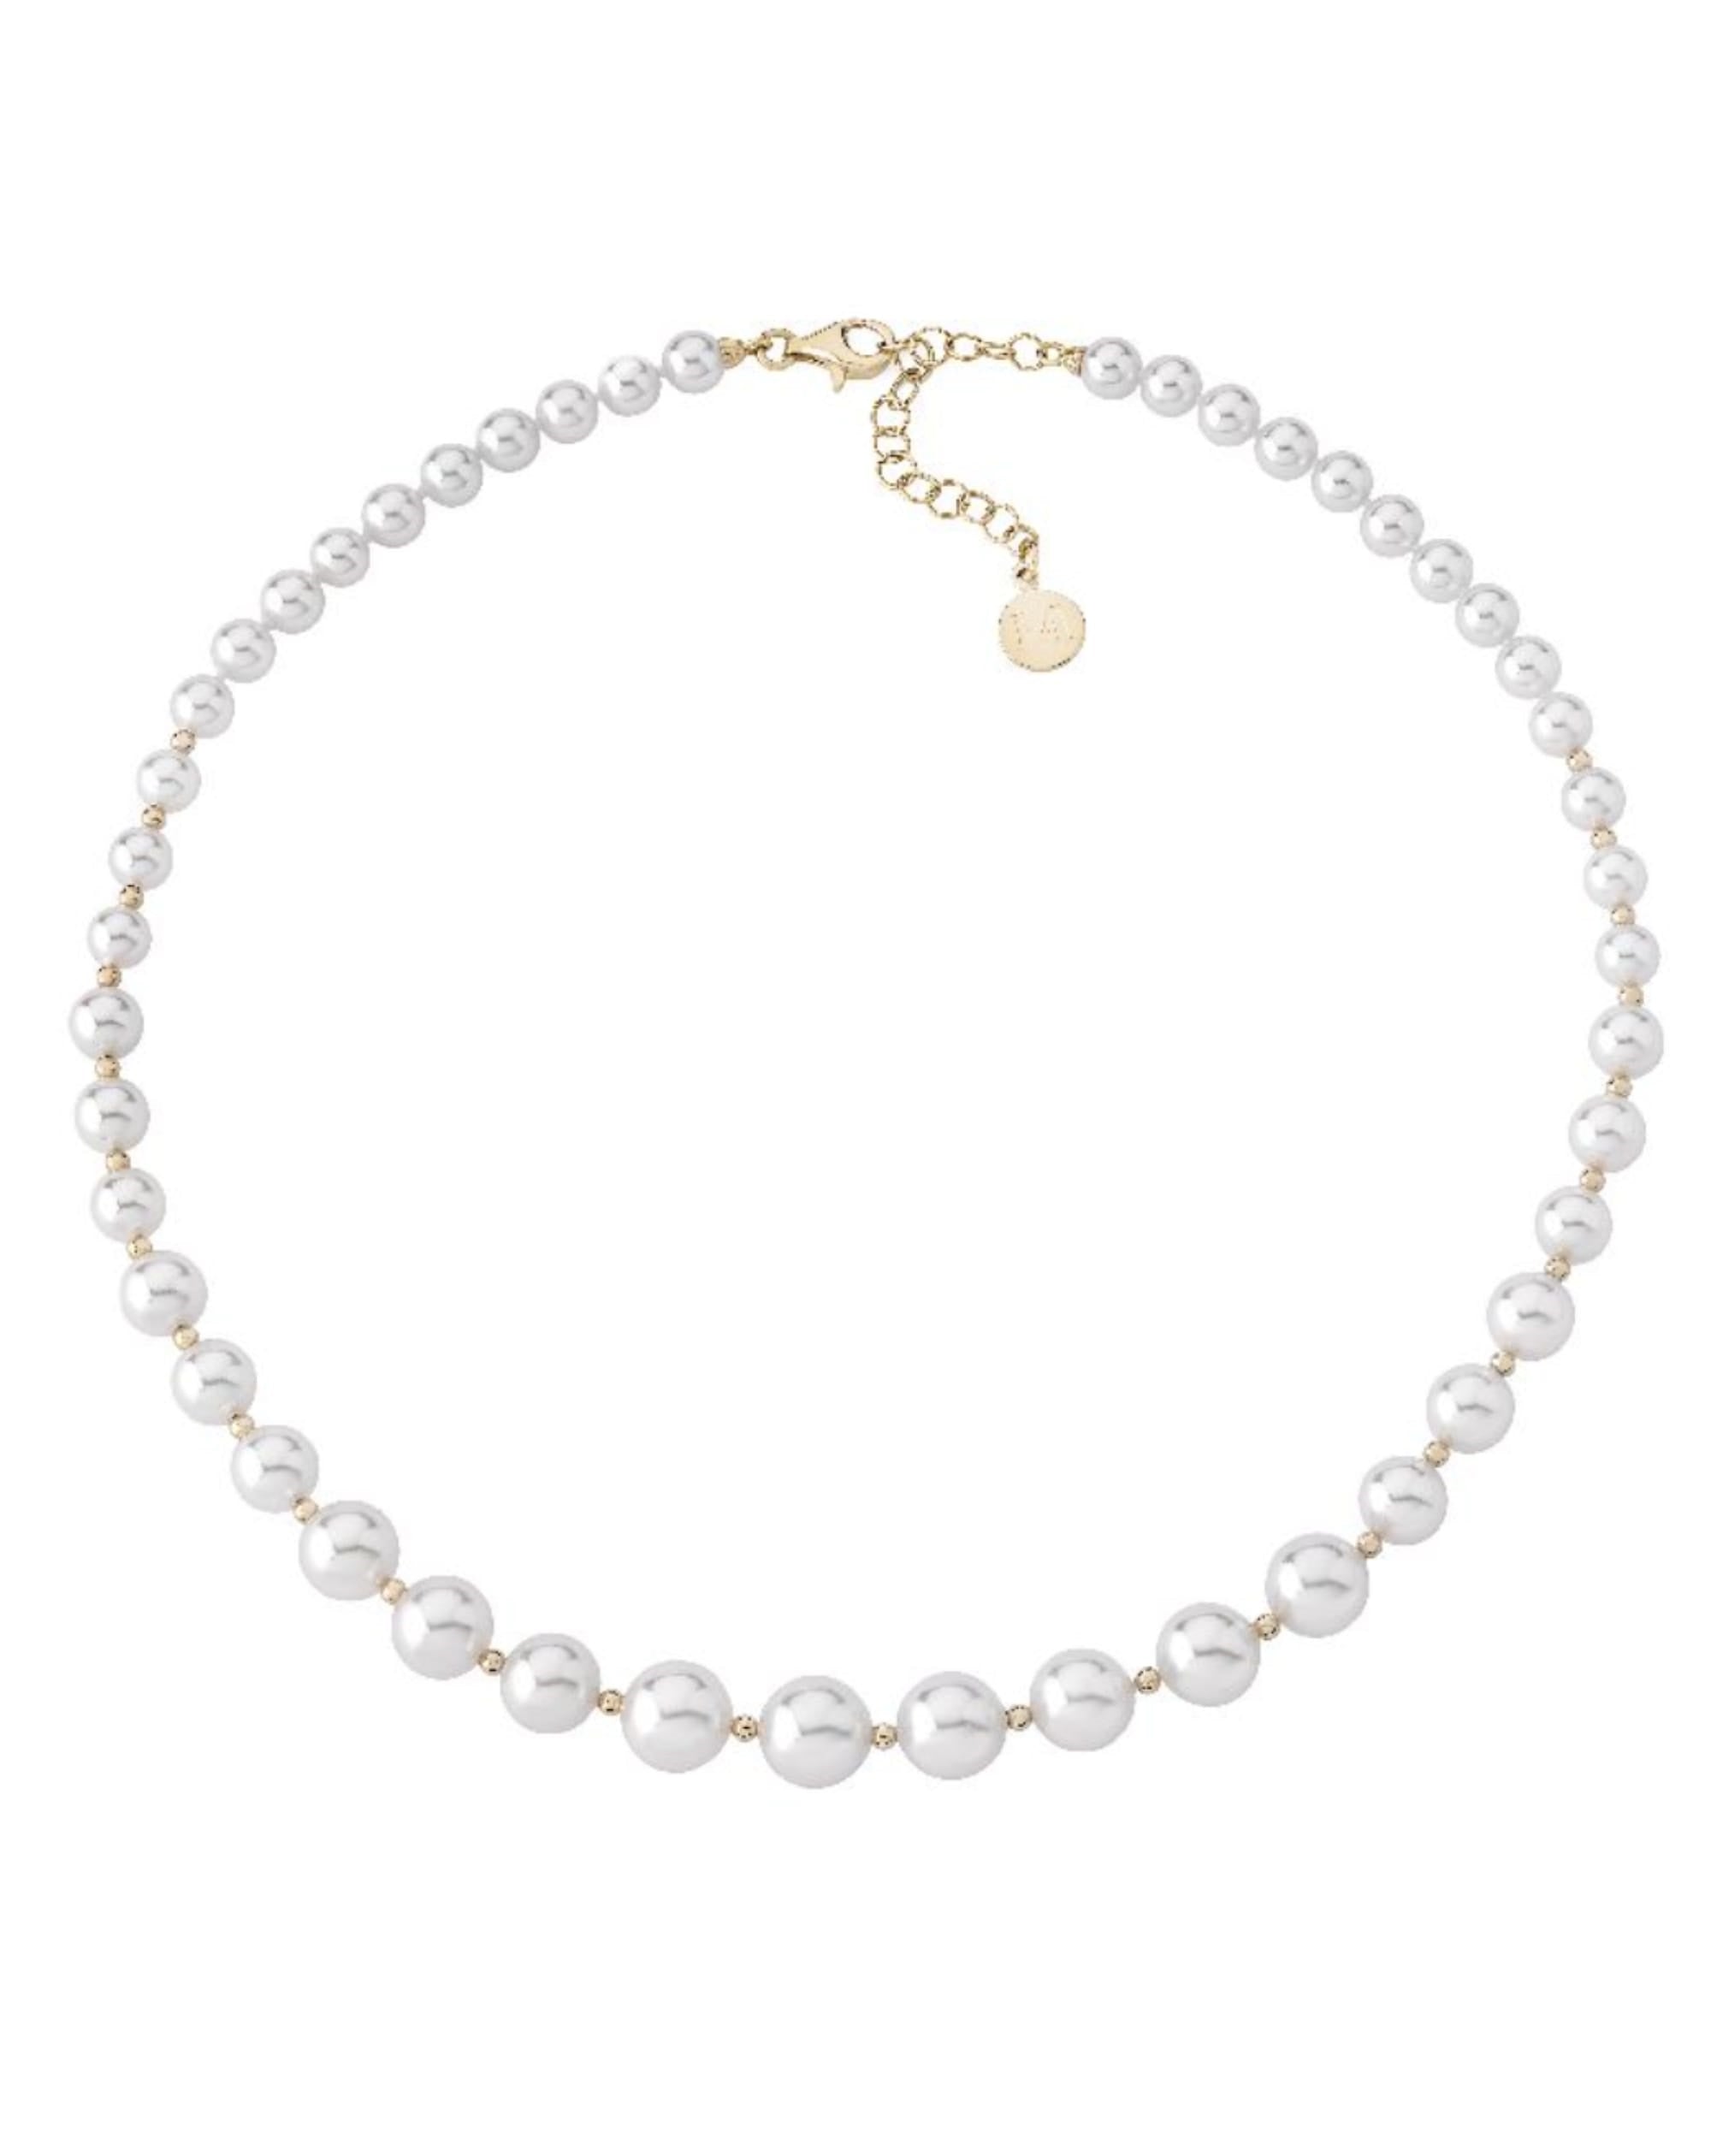 Majorica Pearl Necklace, Sterling Silver and Organic Man Made Pearl Pendant  with Cubic Zirconia Accents - Macy's